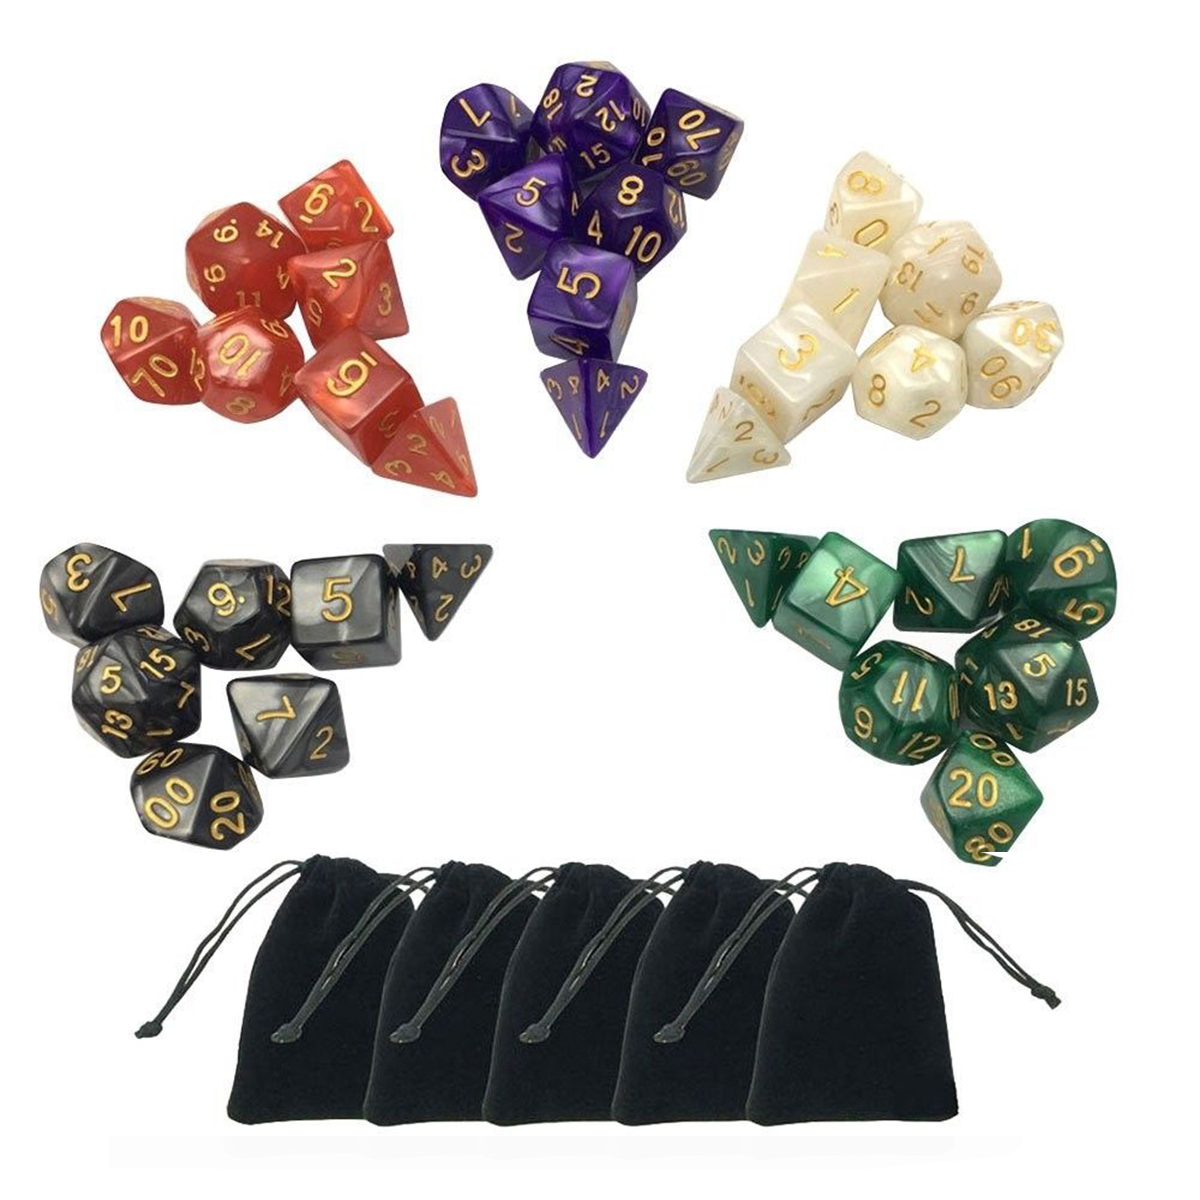 

35Pcs Multisided Dices Set Polyhedral Dice Role Playing Games Gadget 5 Colors